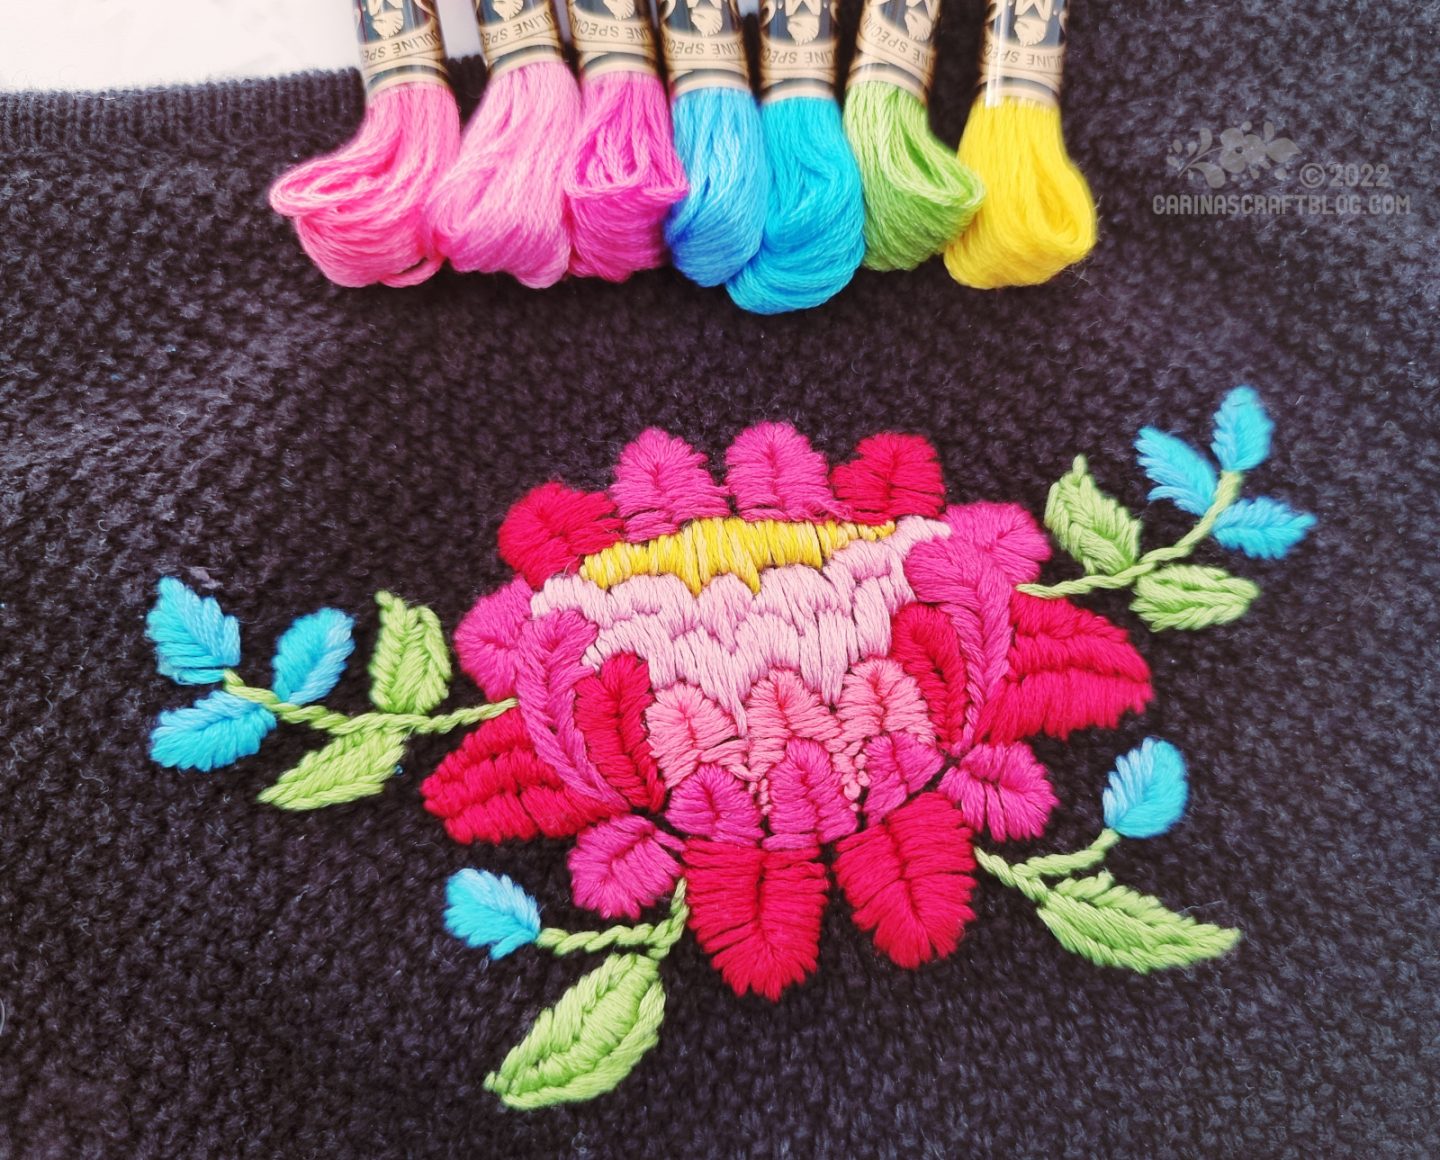 Folk art style flower in red and pink embroidered on a black cardigan.